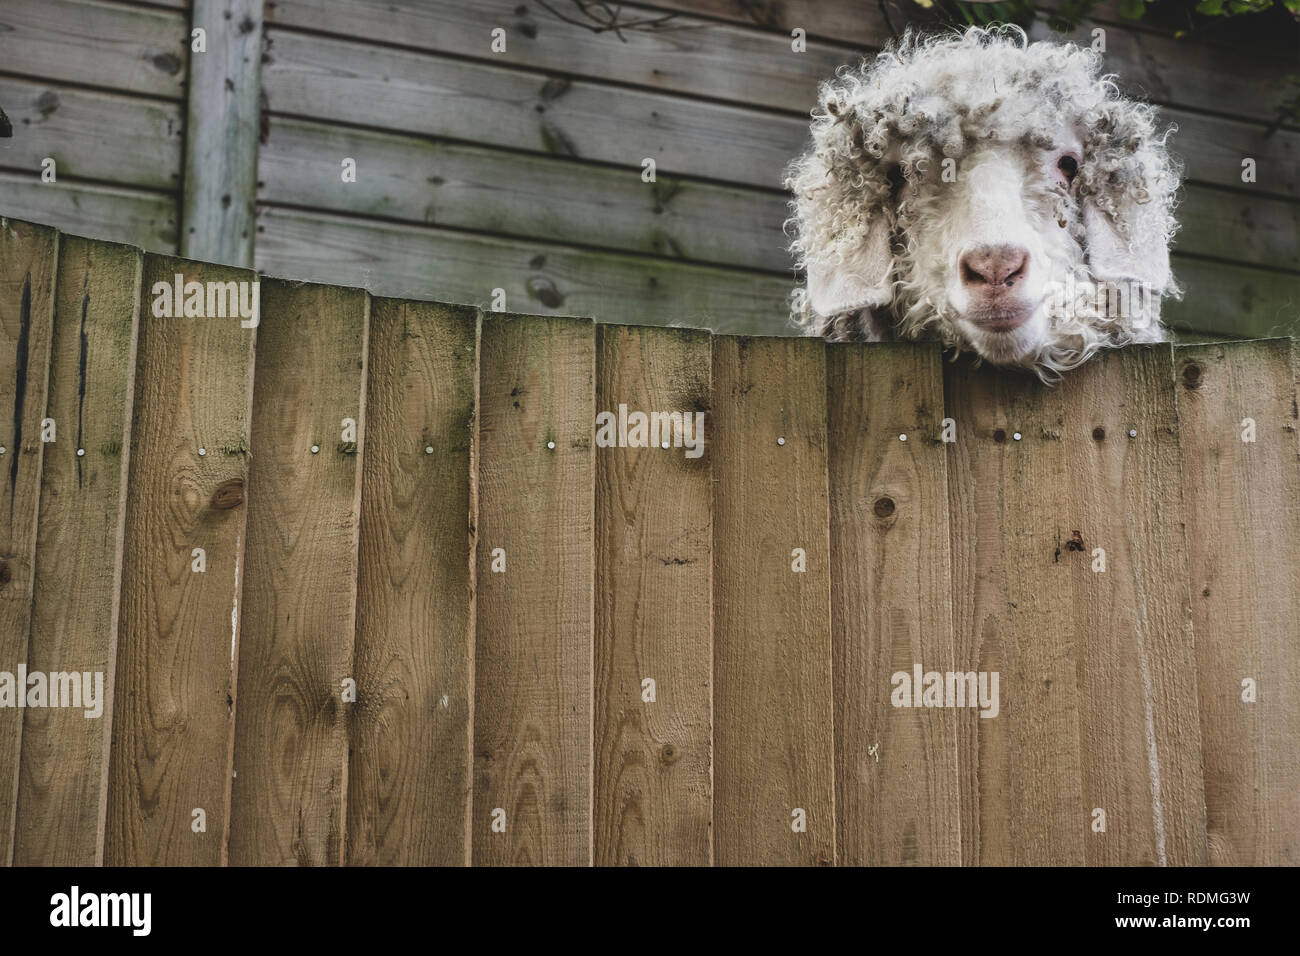 Close up of sheep looking at camera over wooden fence. Stock Photo